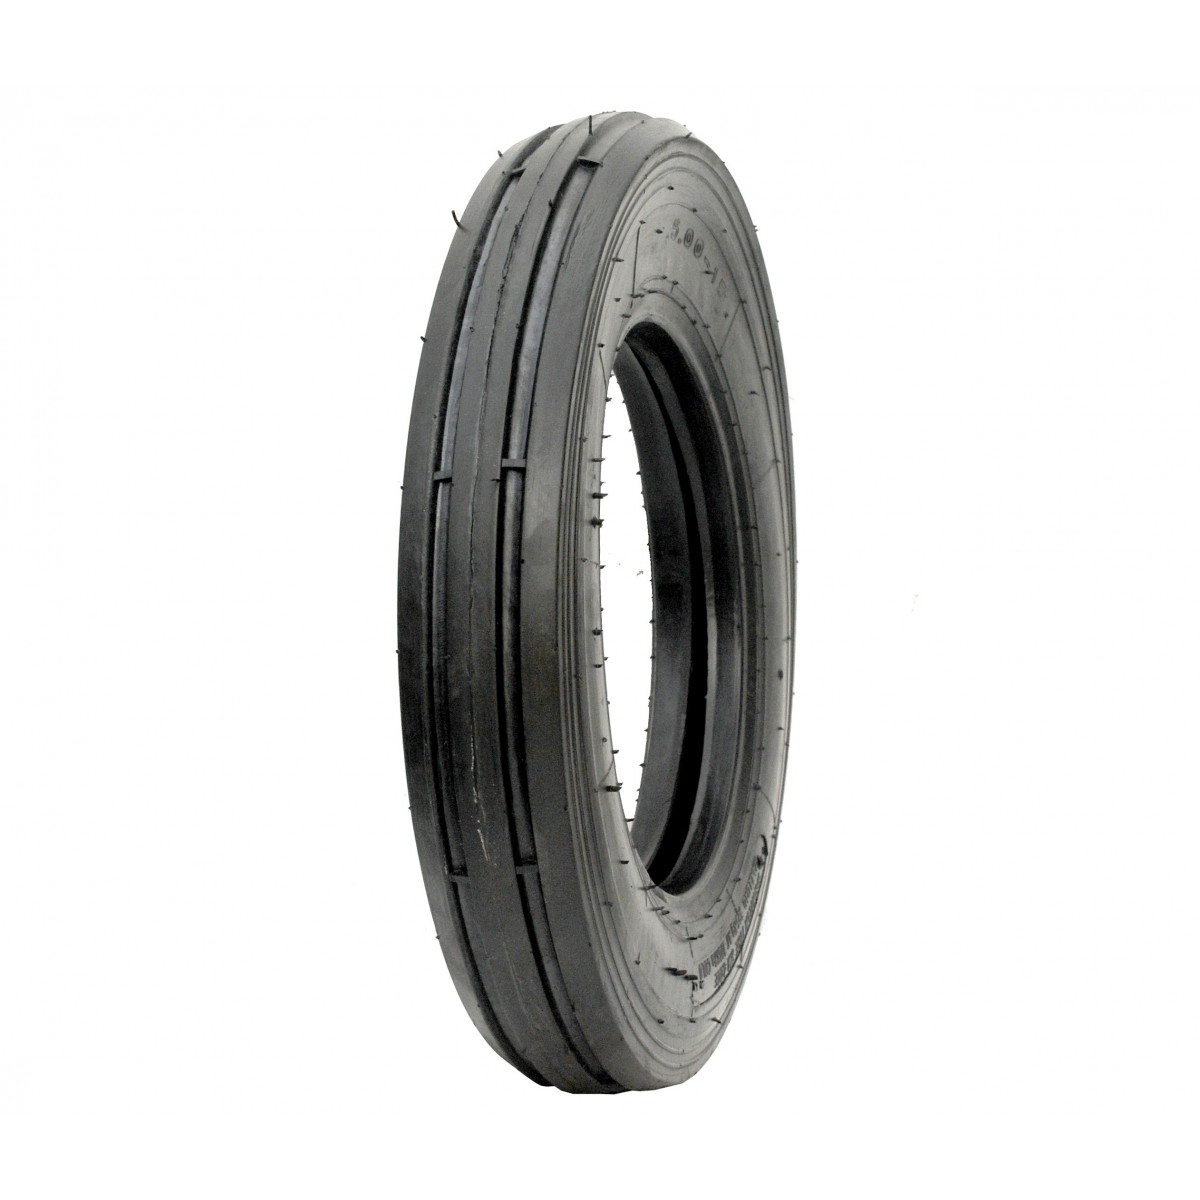 Agricultural tire 5.00-15 6PR 5-15 5x15 SMOOTH